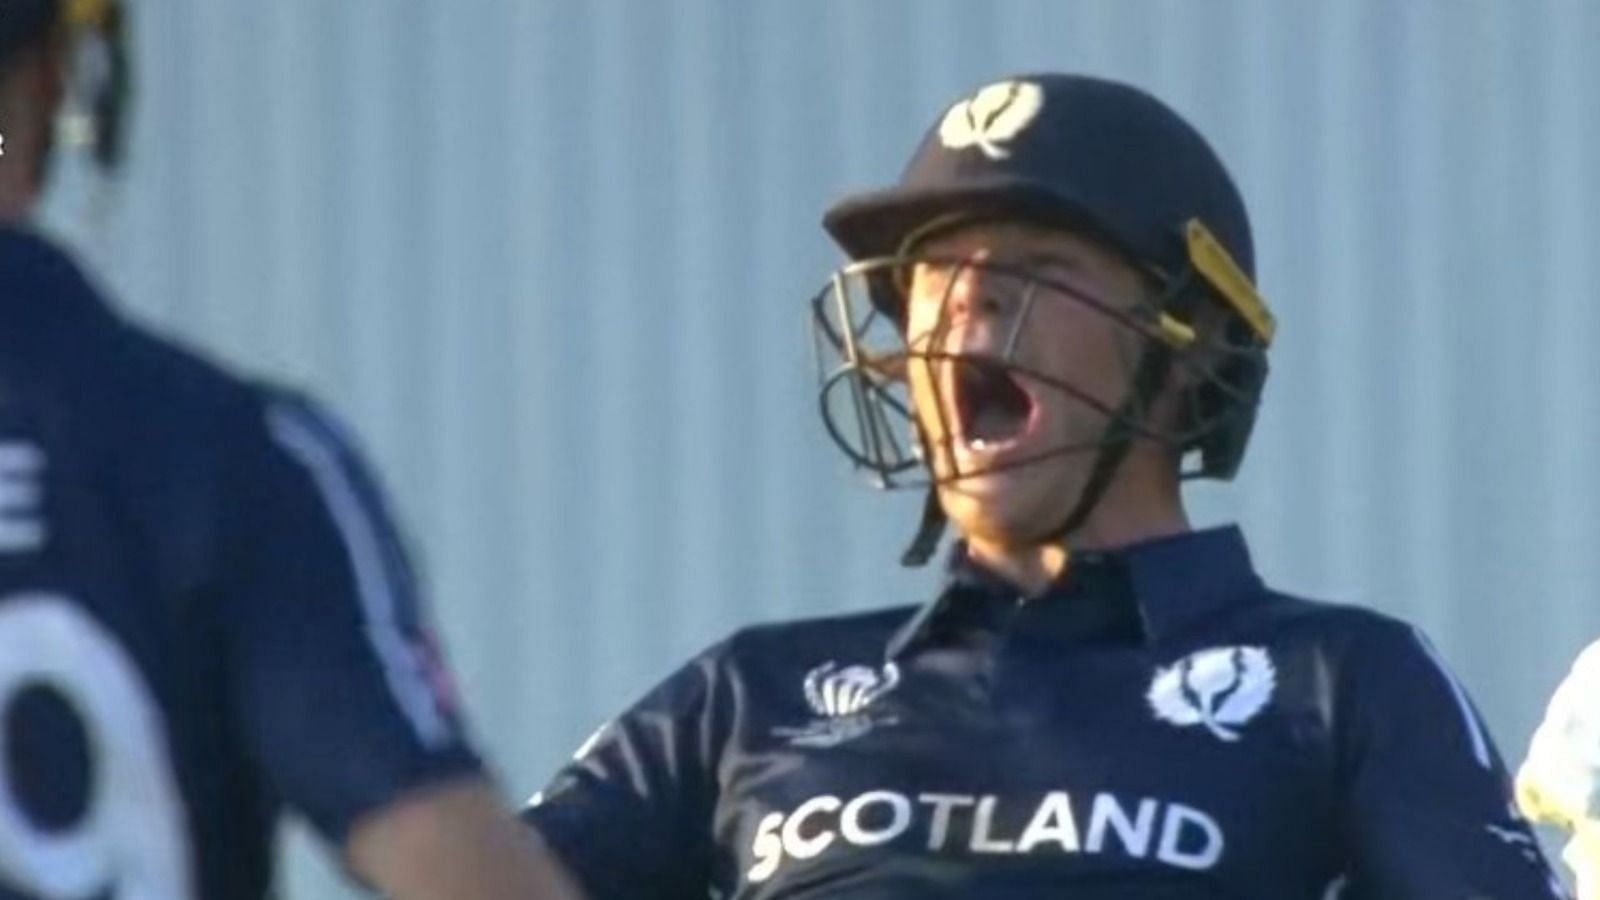 Michael Leask roars after taking Scotland to a famous win (P.C.:Twitter)